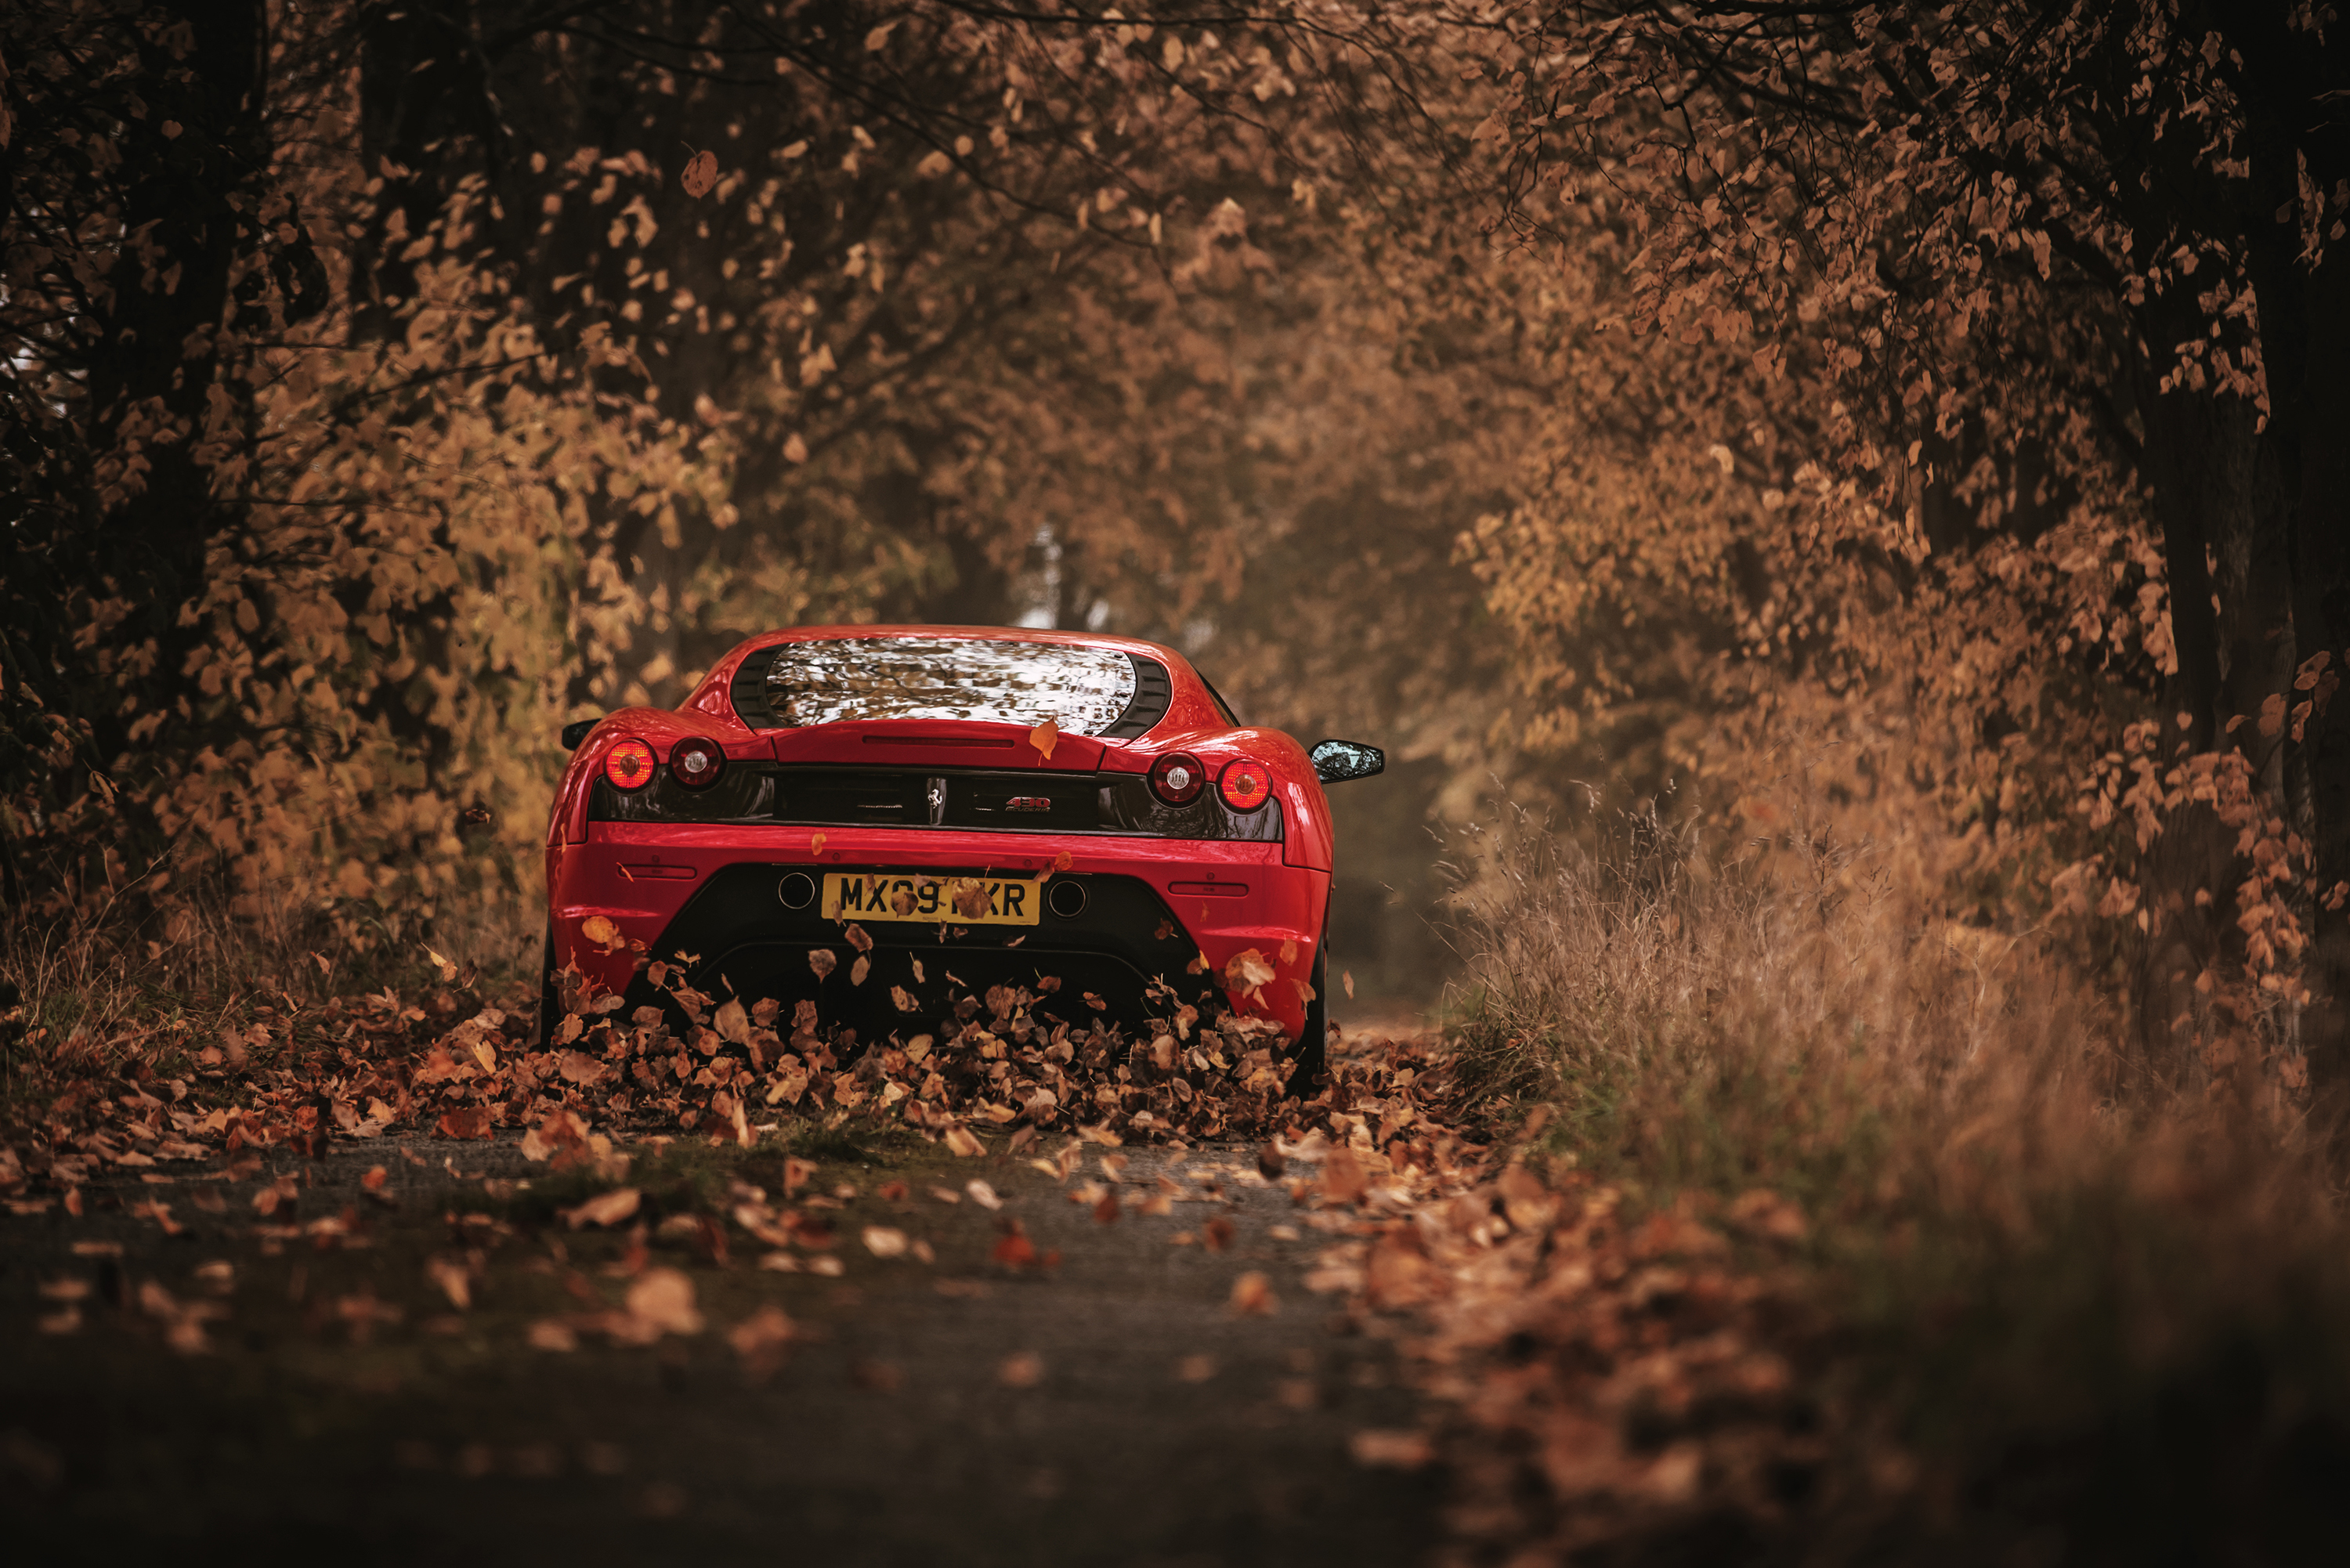 cars, ferrari, back view, autumn, rear view, red, racing, scuderia High Definition image